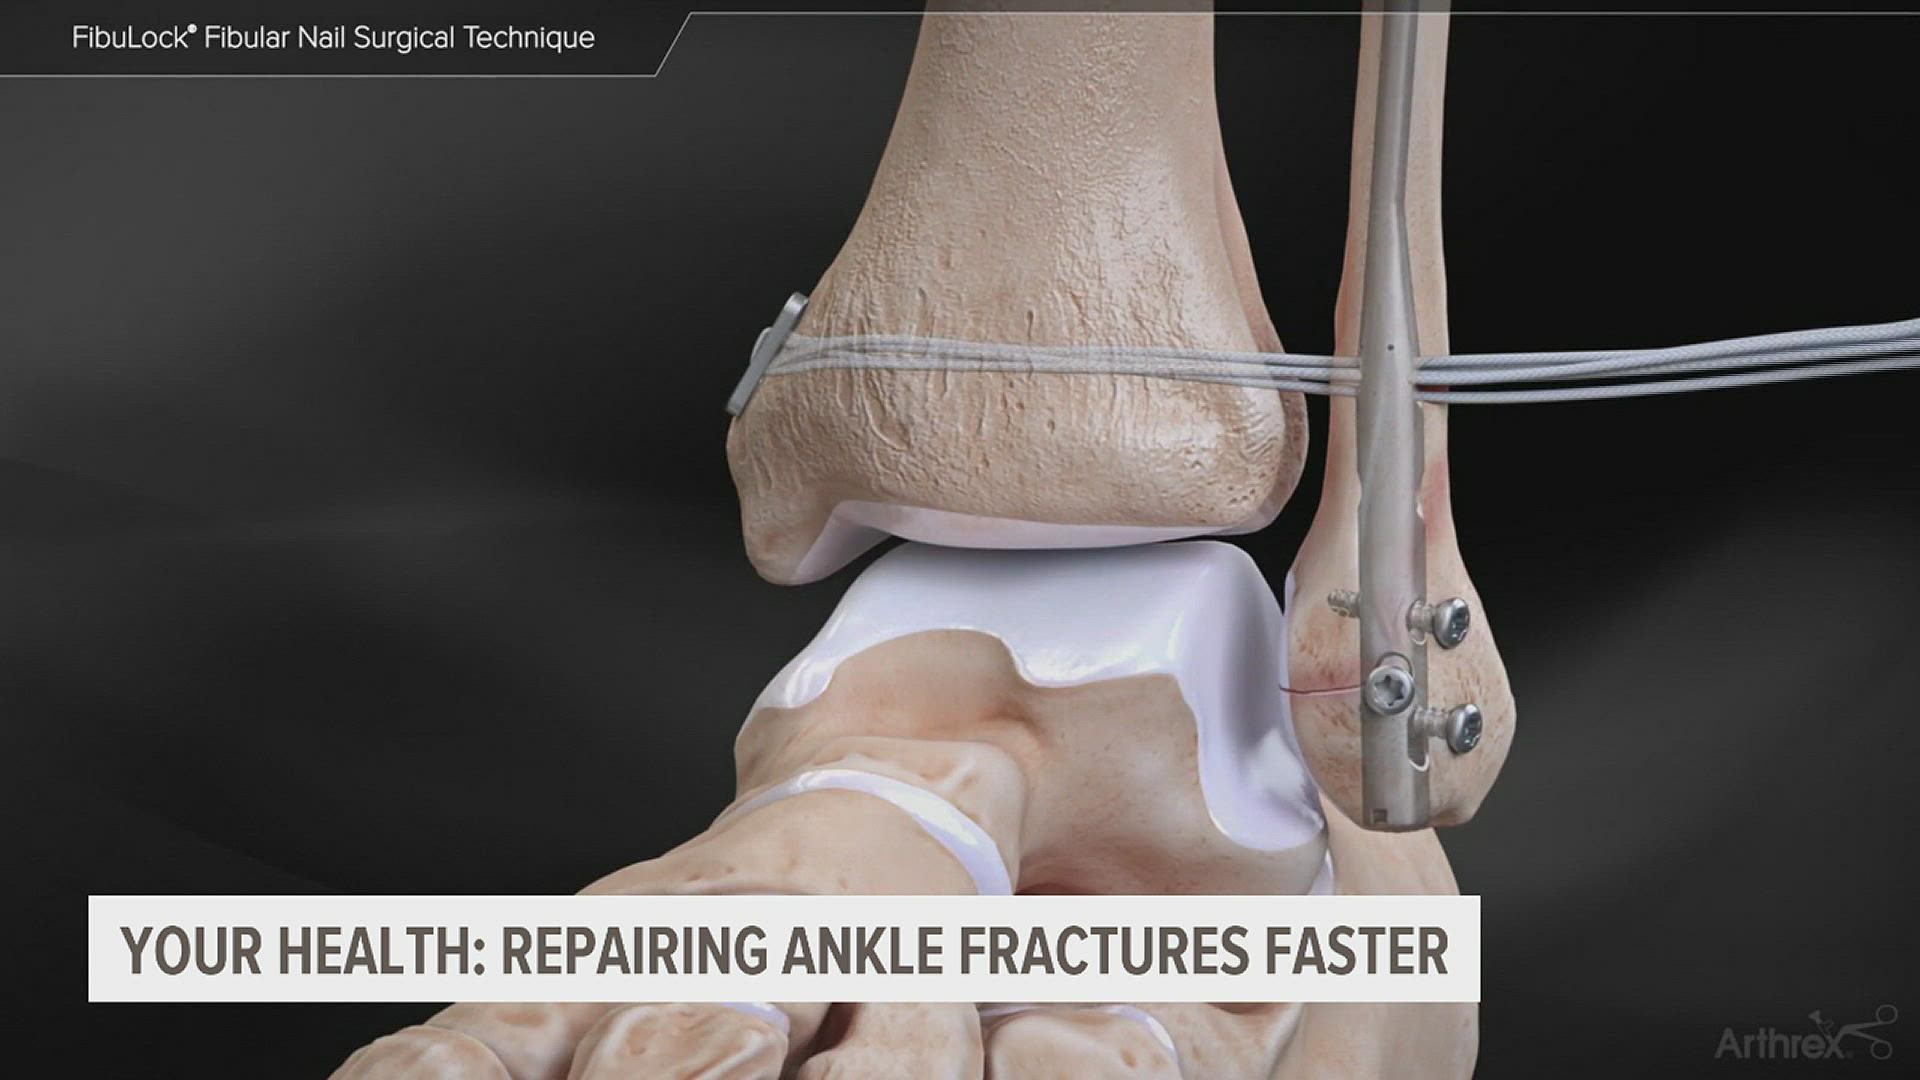 Ankle fractures, usually caused by twisting an ankle, are one of the most common injuries. Now, new technology is allowing patients to get up and get moving faster.